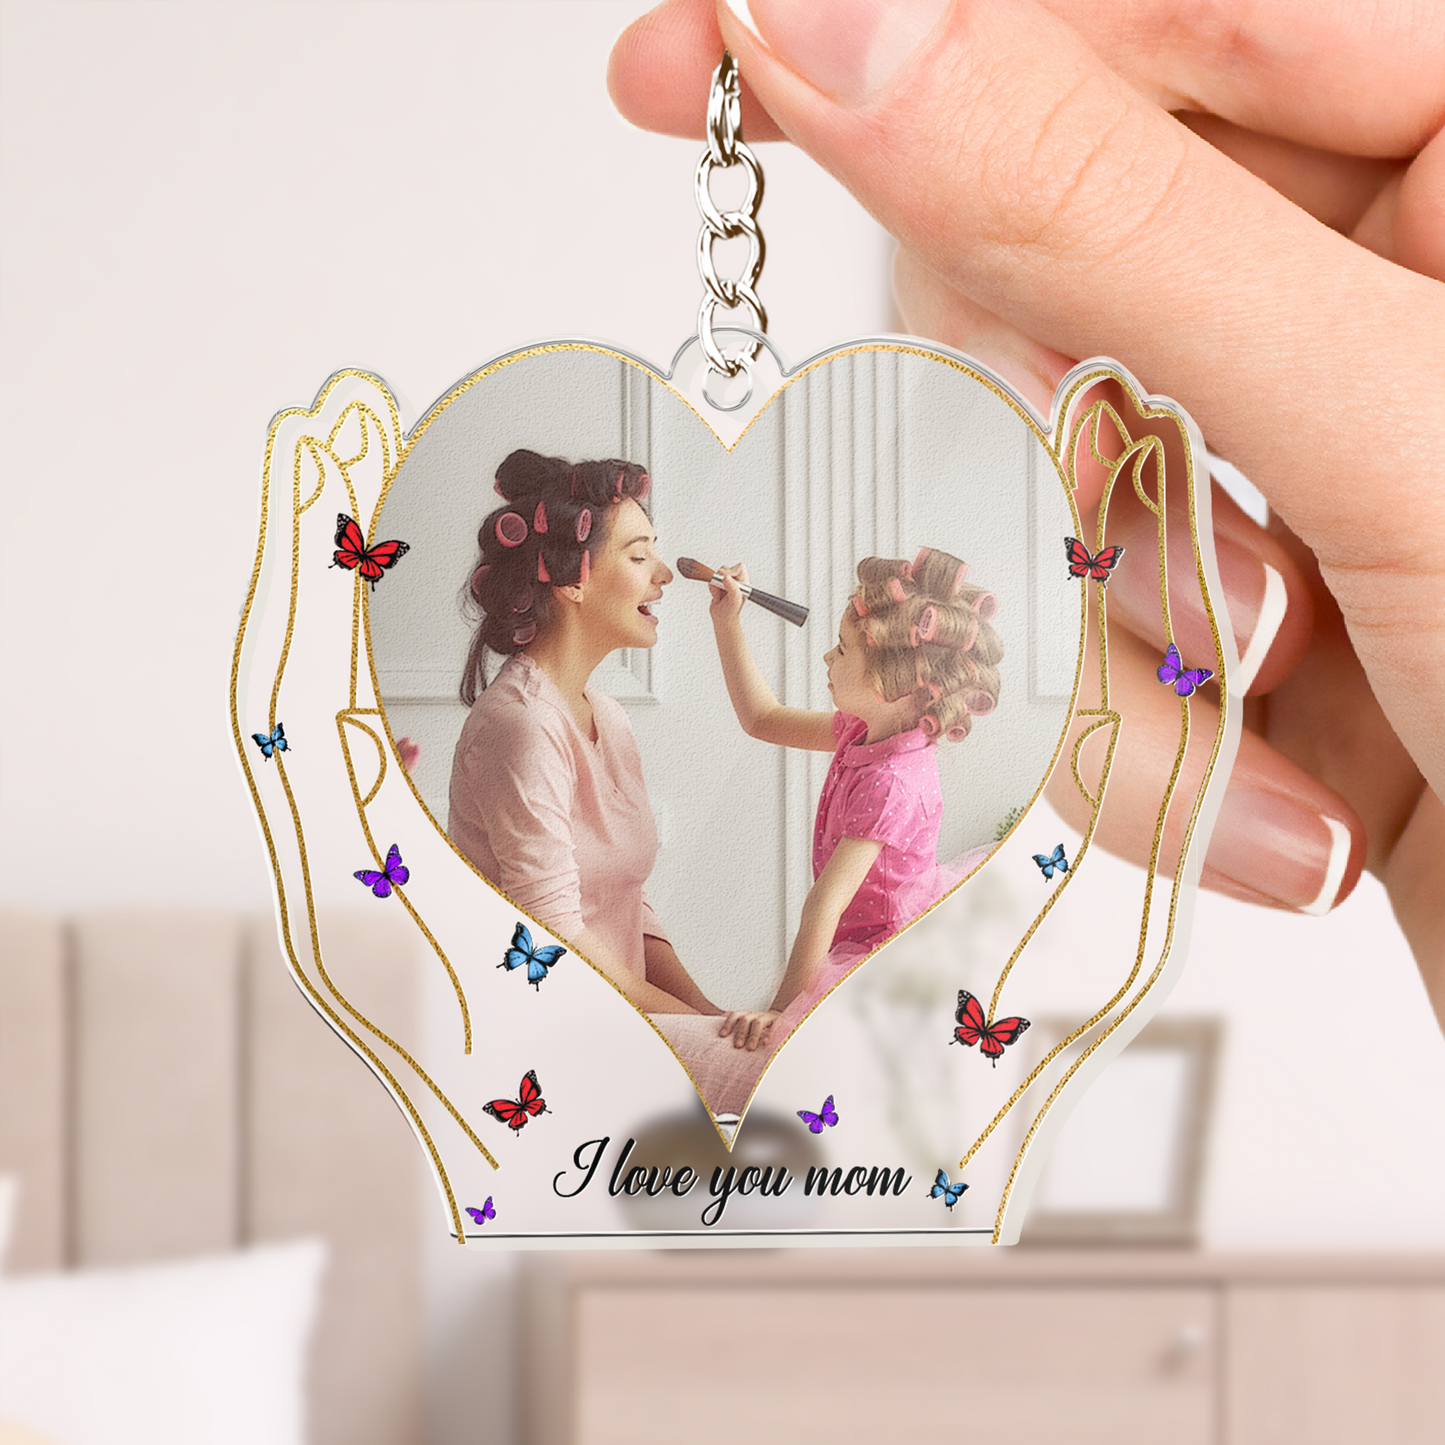 Hands Holding Love - Personalized Acrylic Photo Keychain